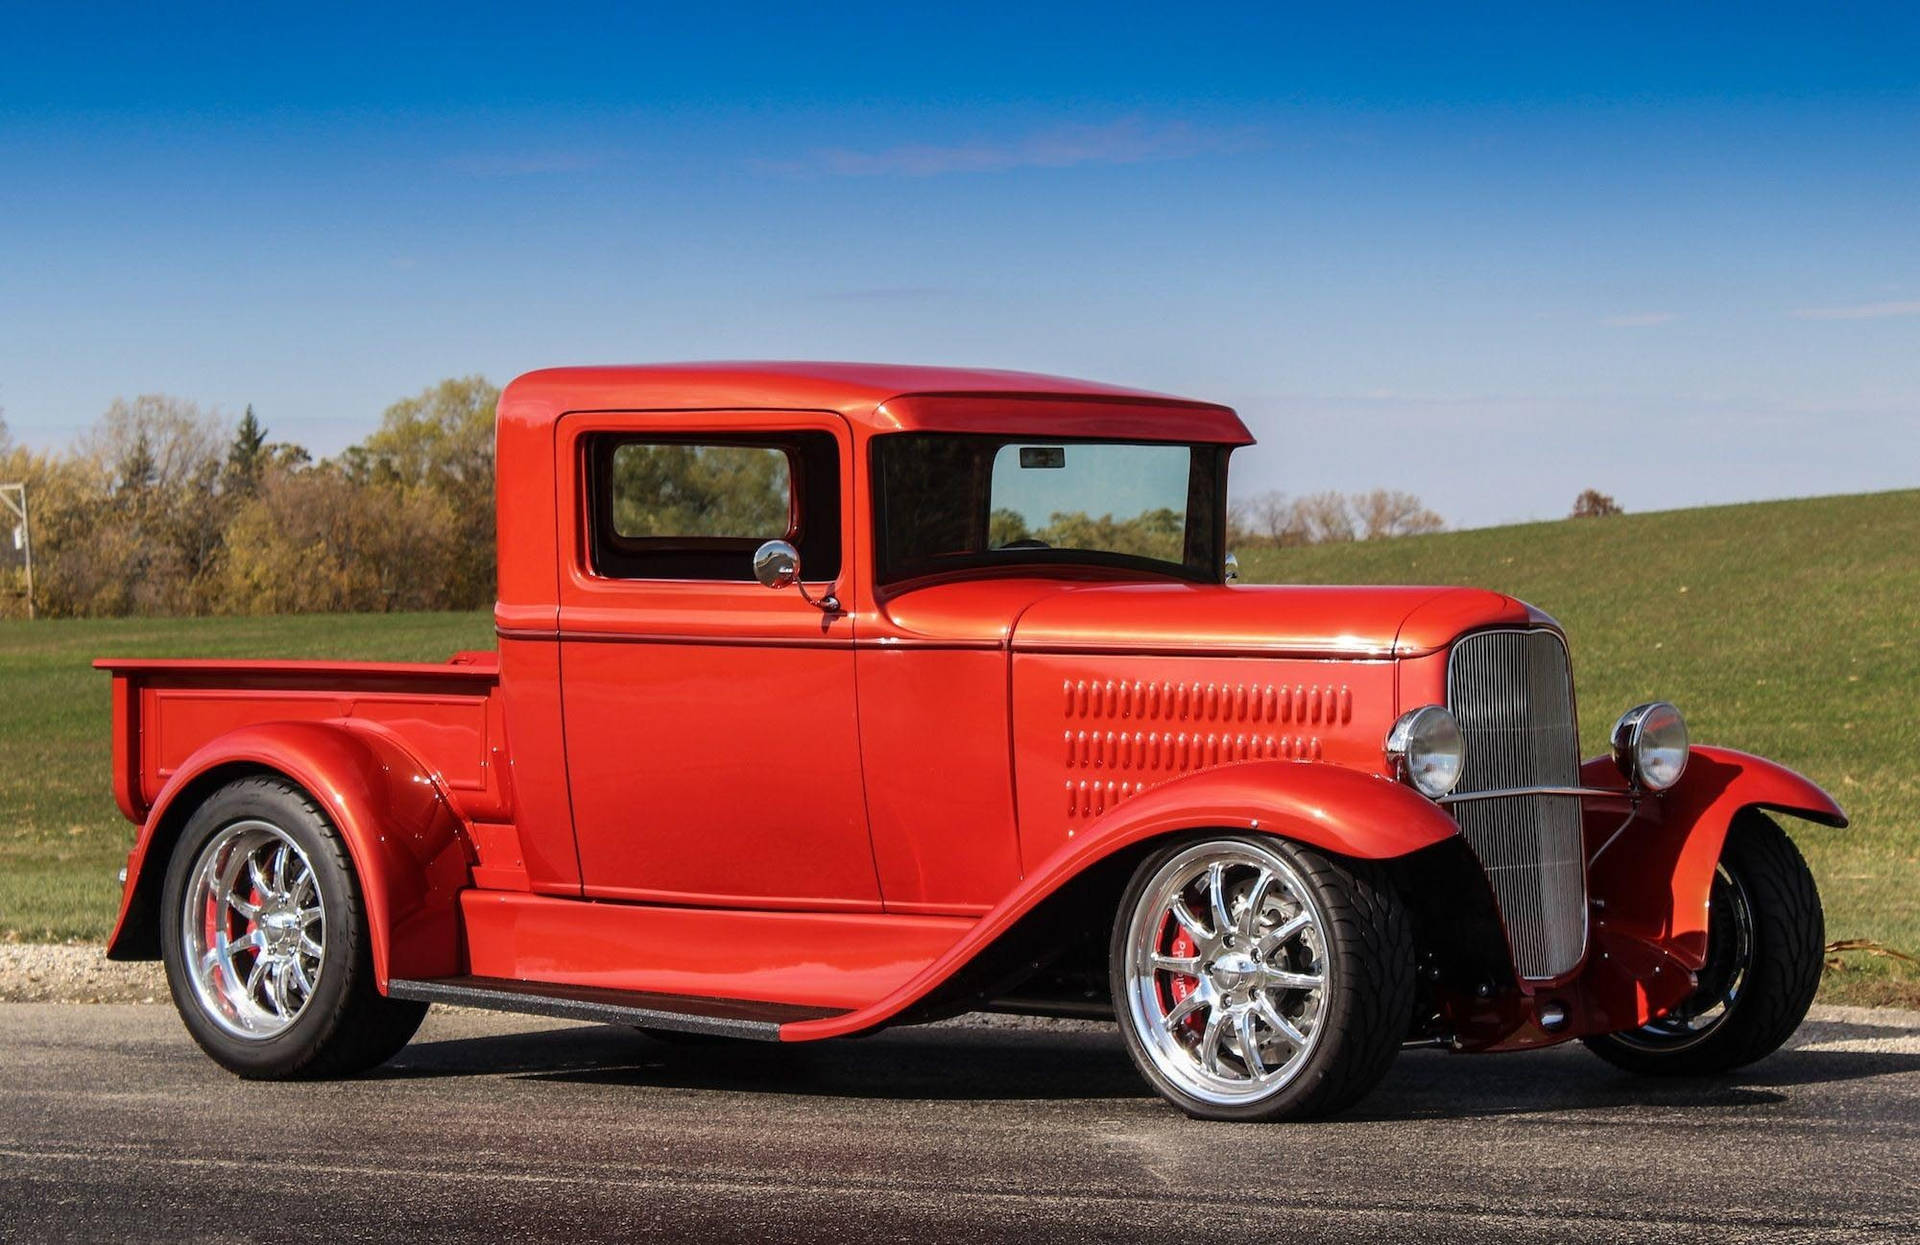 1935 Red Old Ford Truck Wallpaper